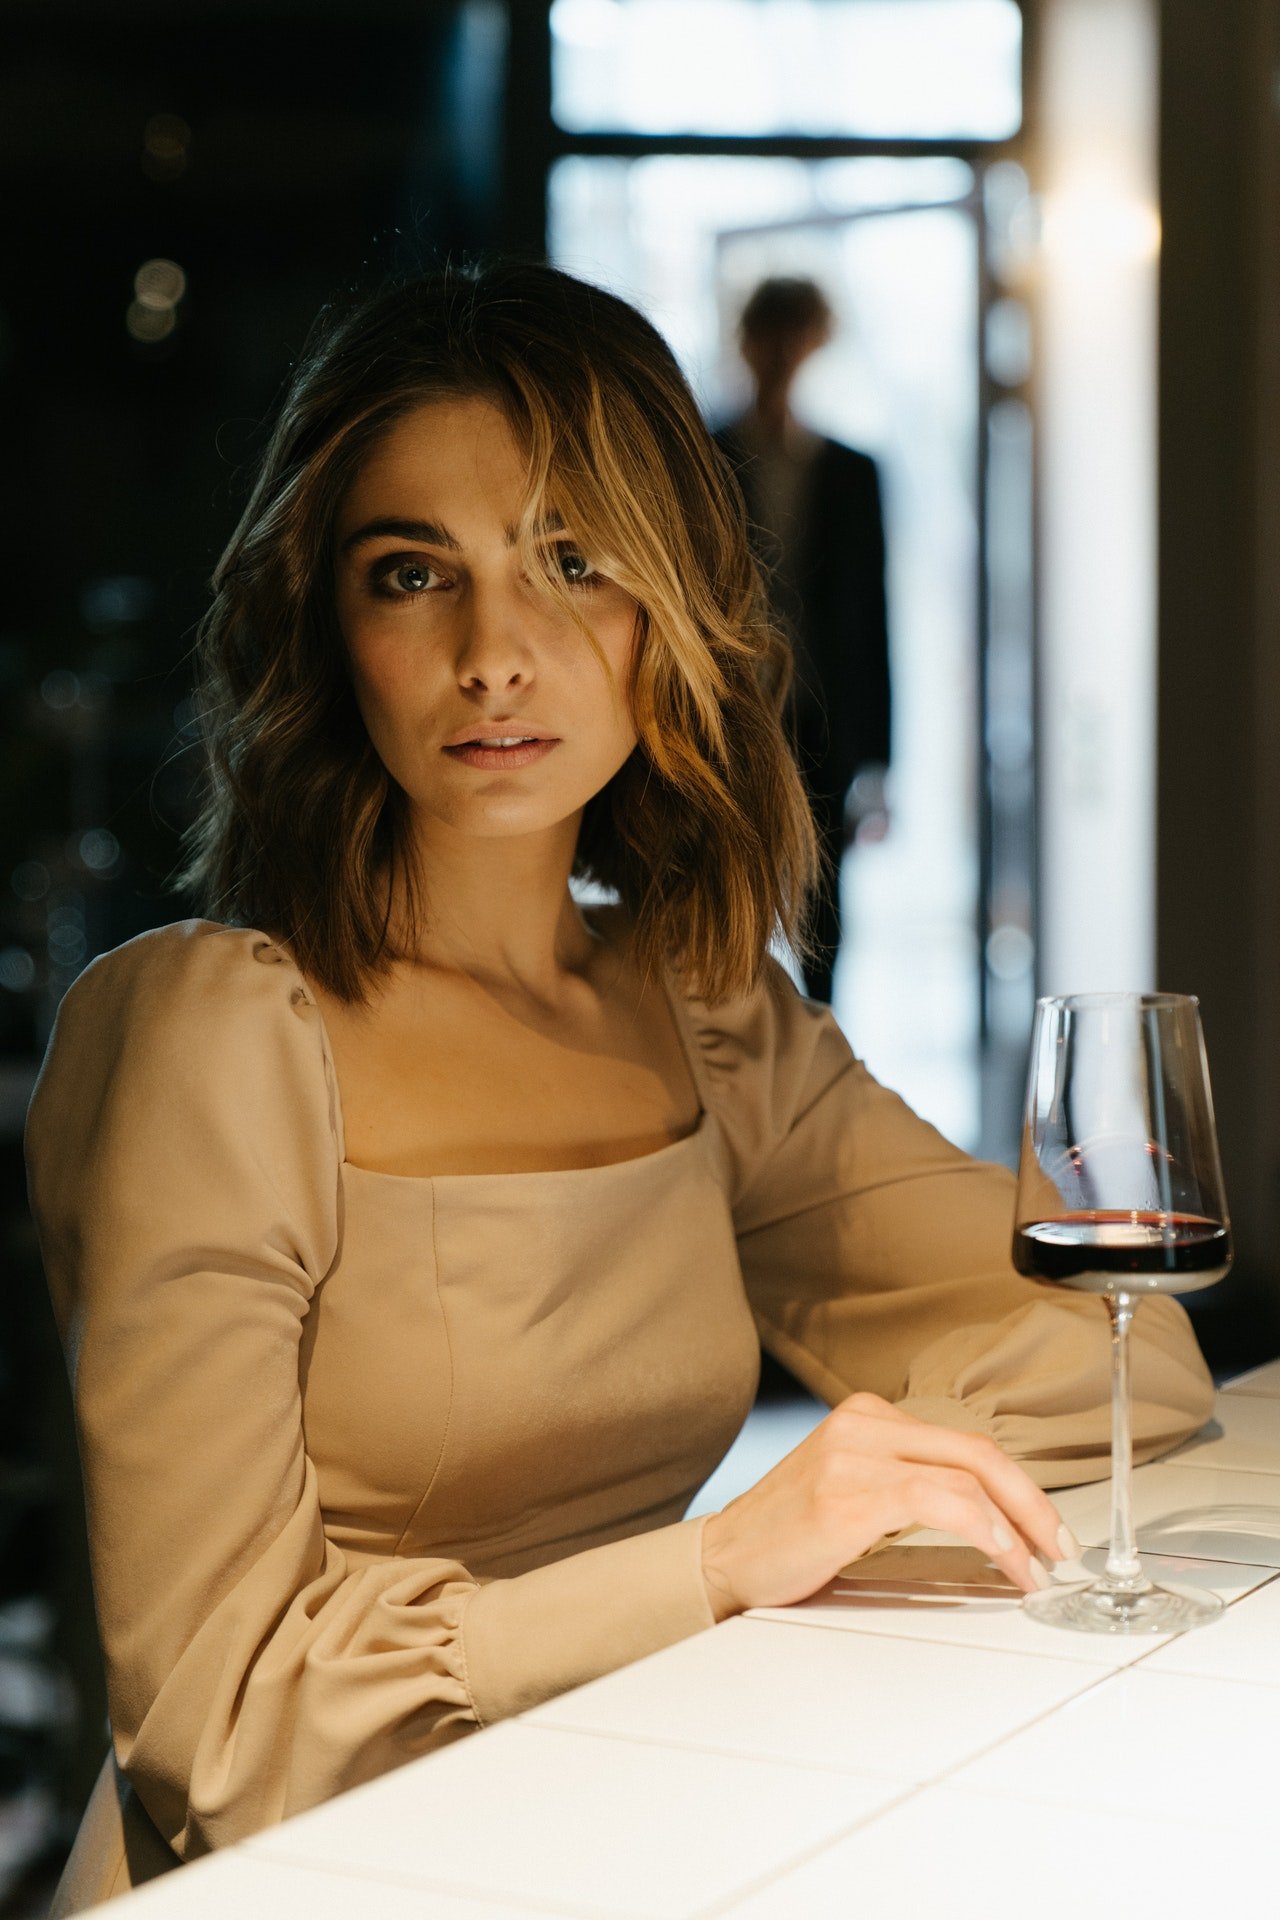 Photo of a woman in a restaurant holding a wine glass | Photo: Pexels